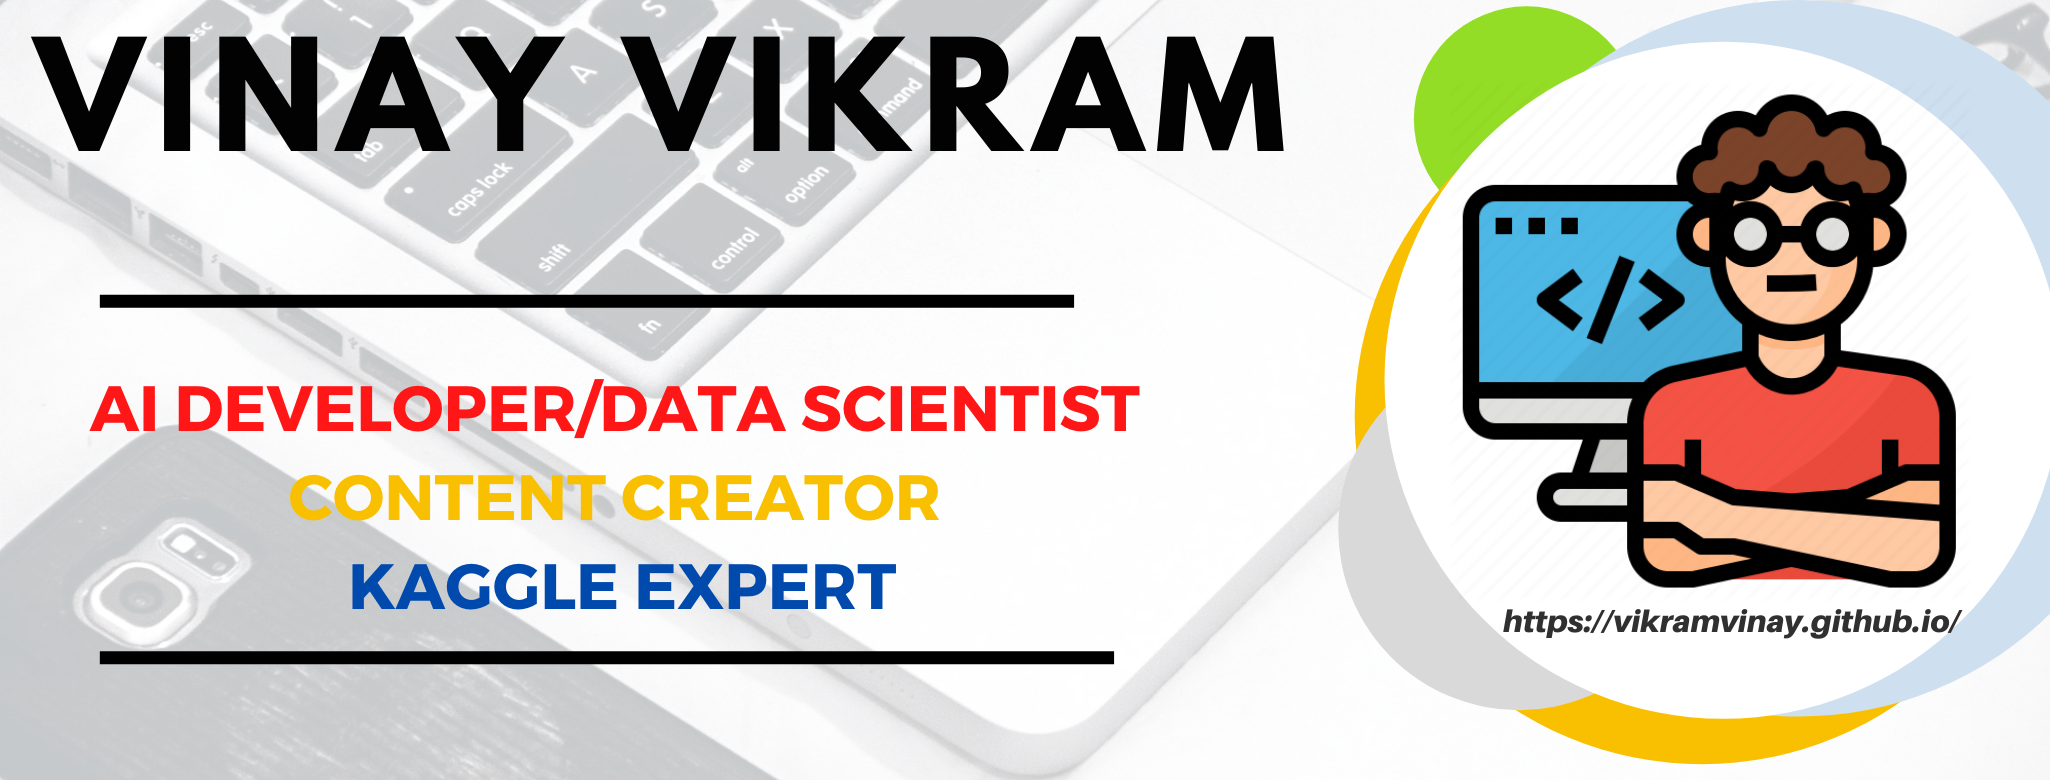 banner that says Vinay vikram - Artificial Intelligence Developer/Data Scientist, content creator and KaggleExpert/ height=500 width=700